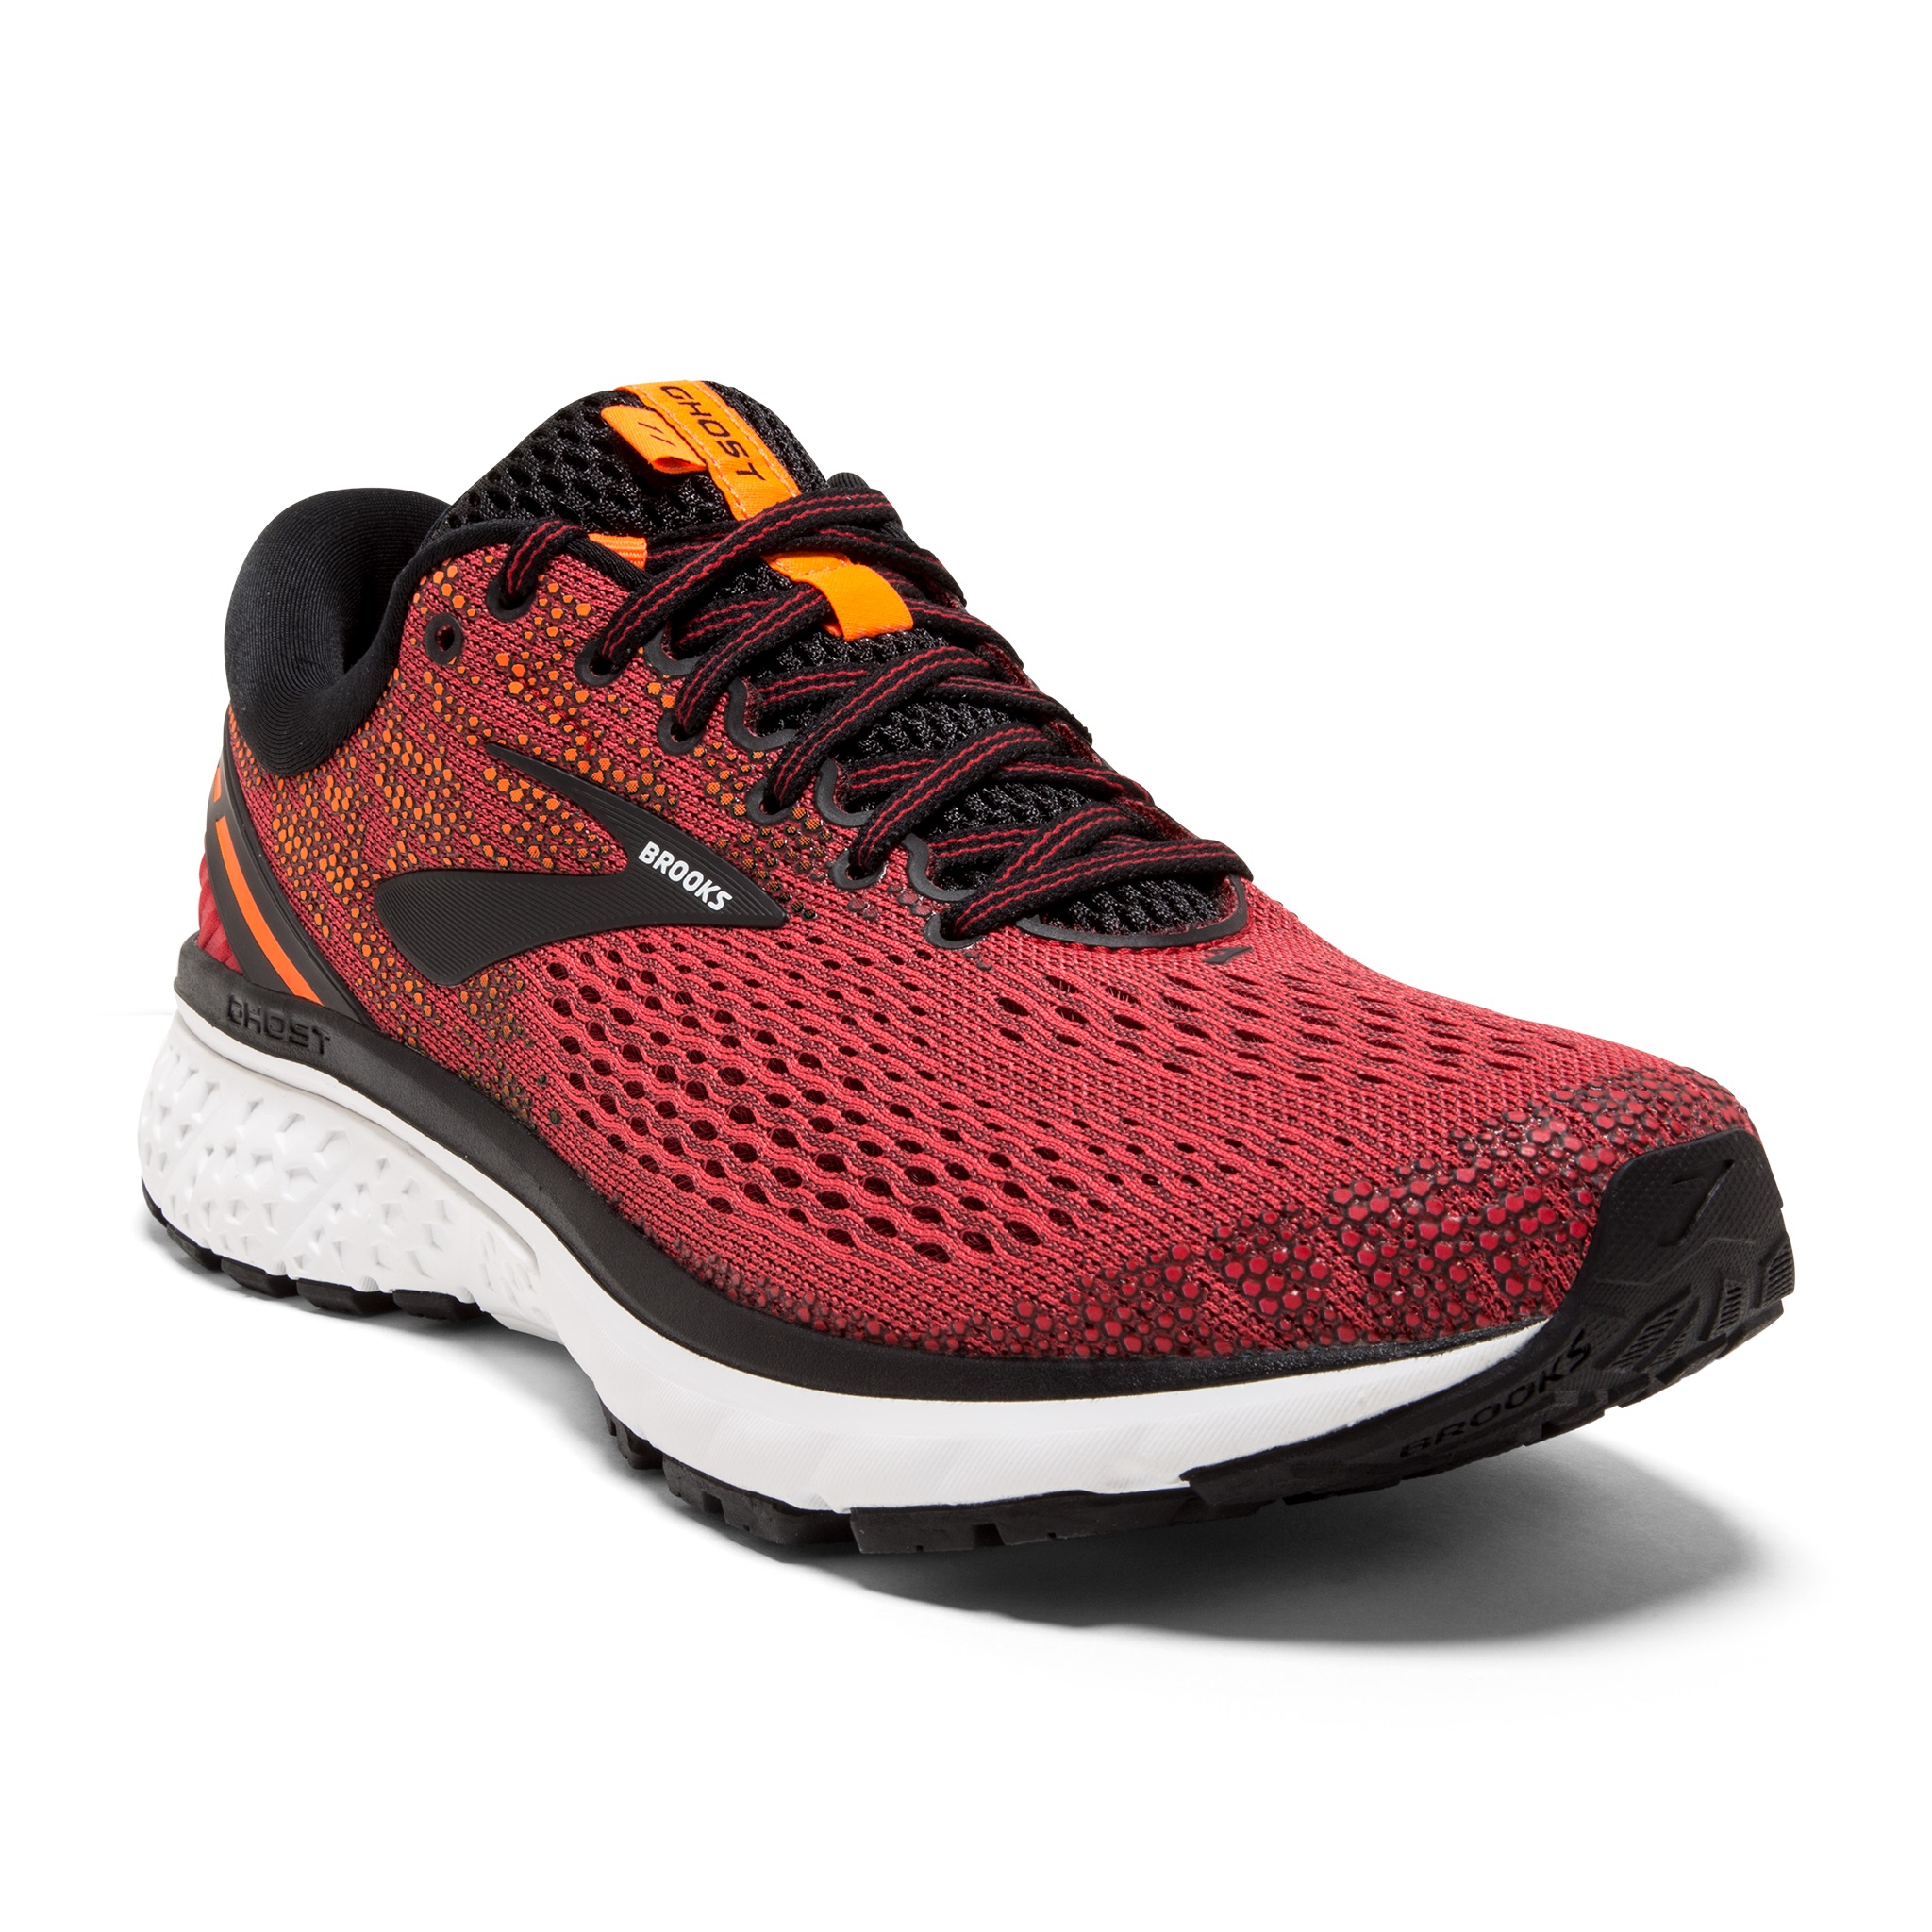 BROOKS GHOST 11 ROUGE Chaussures de running